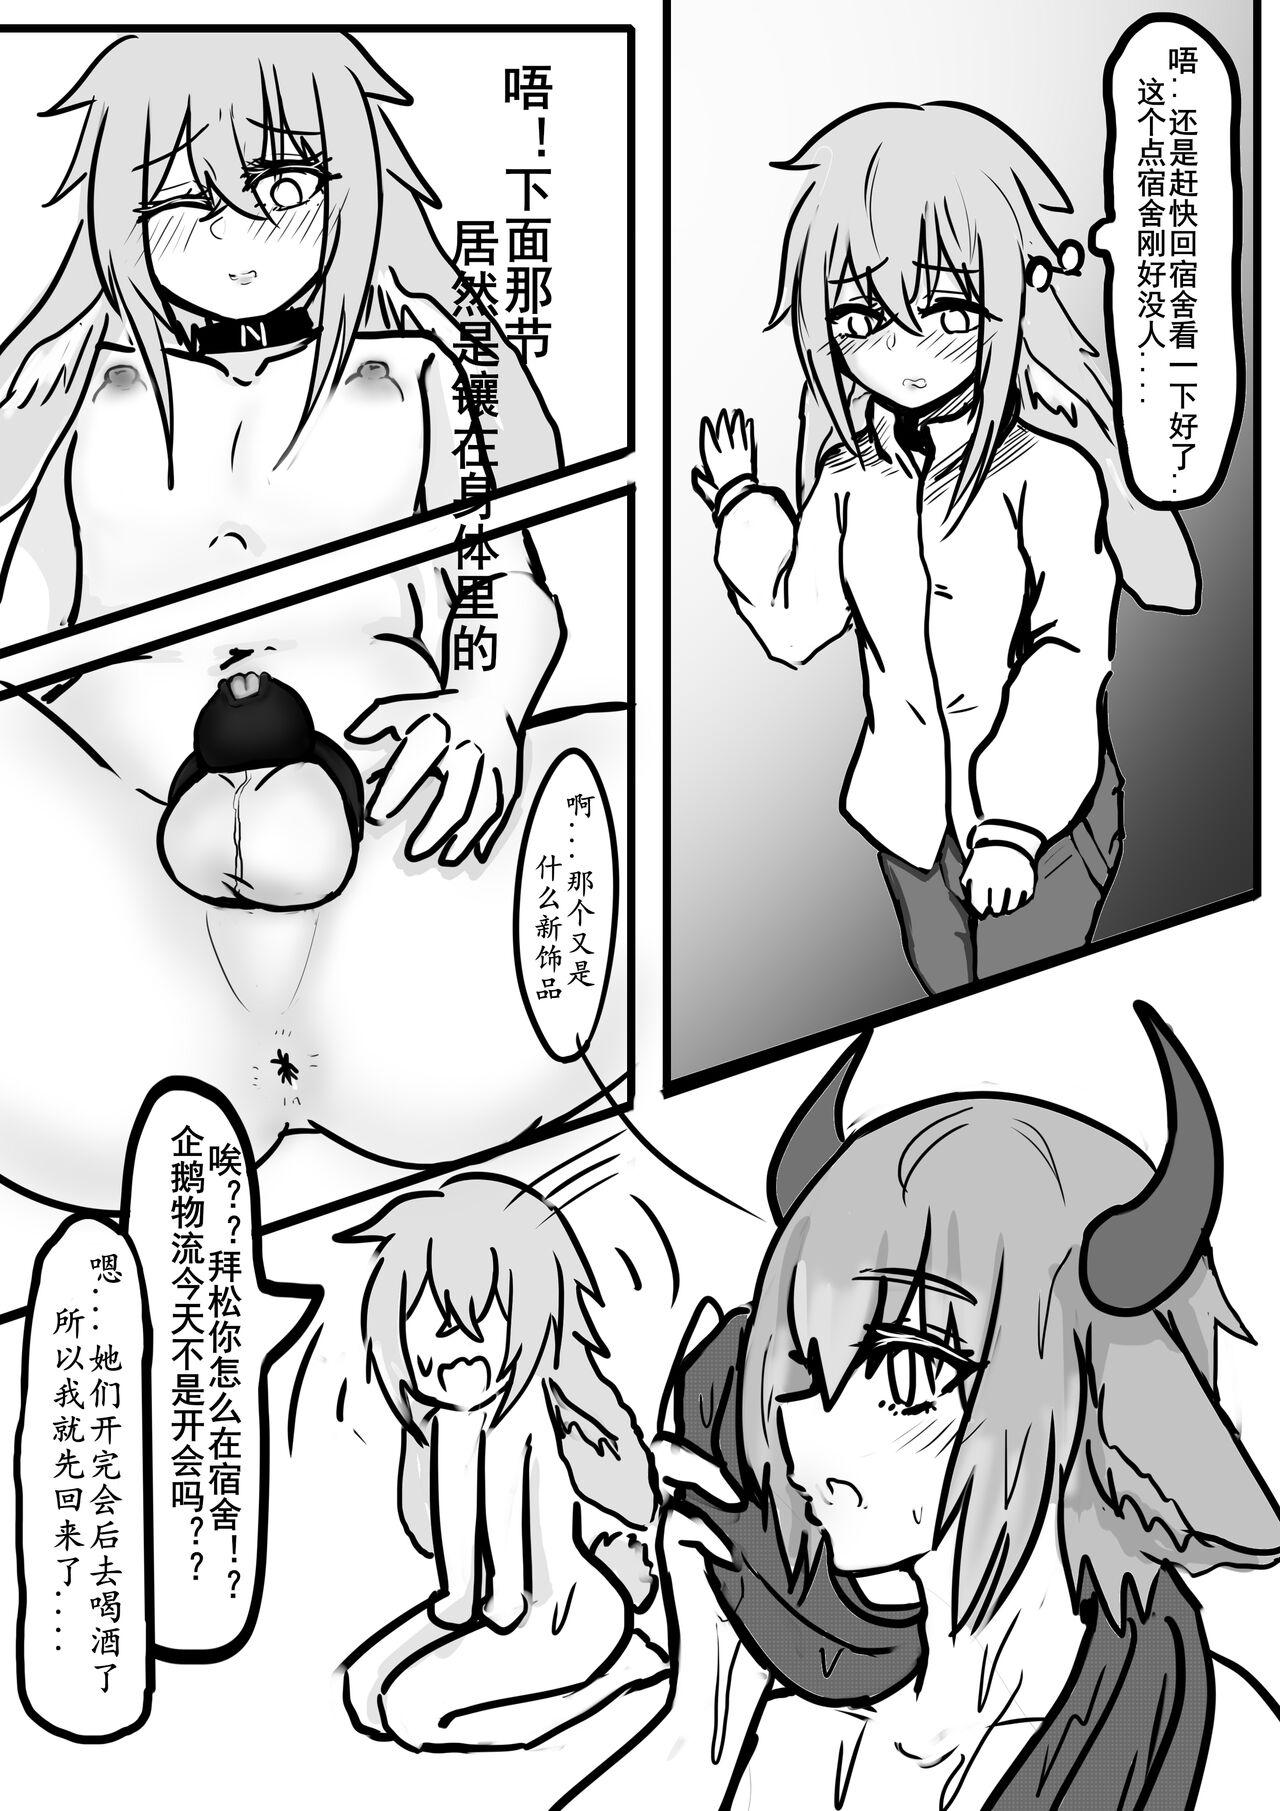 Exibicionismo Special services of Ansel Ⅲ - Arknights Titten - Page 7